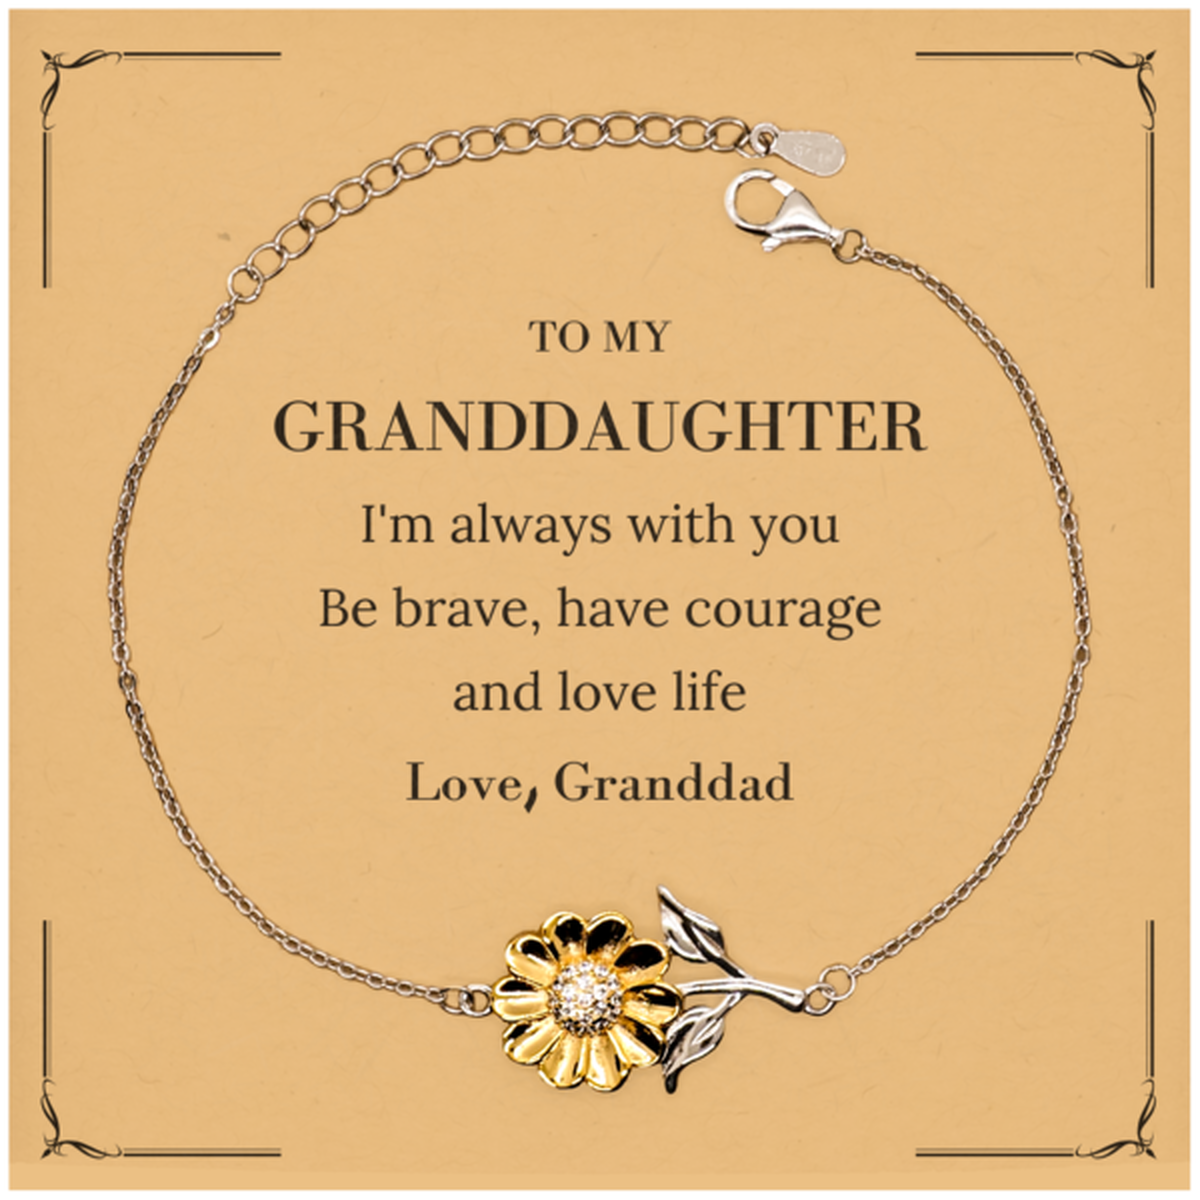 To My Granddaughter Gifts from Granddad, Unique Sunflower Bracelet Inspirational Christmas Birthday Graduation Gifts for Granddaughter I'm always with you. Be brave, have courage and love life. Love, Granddad